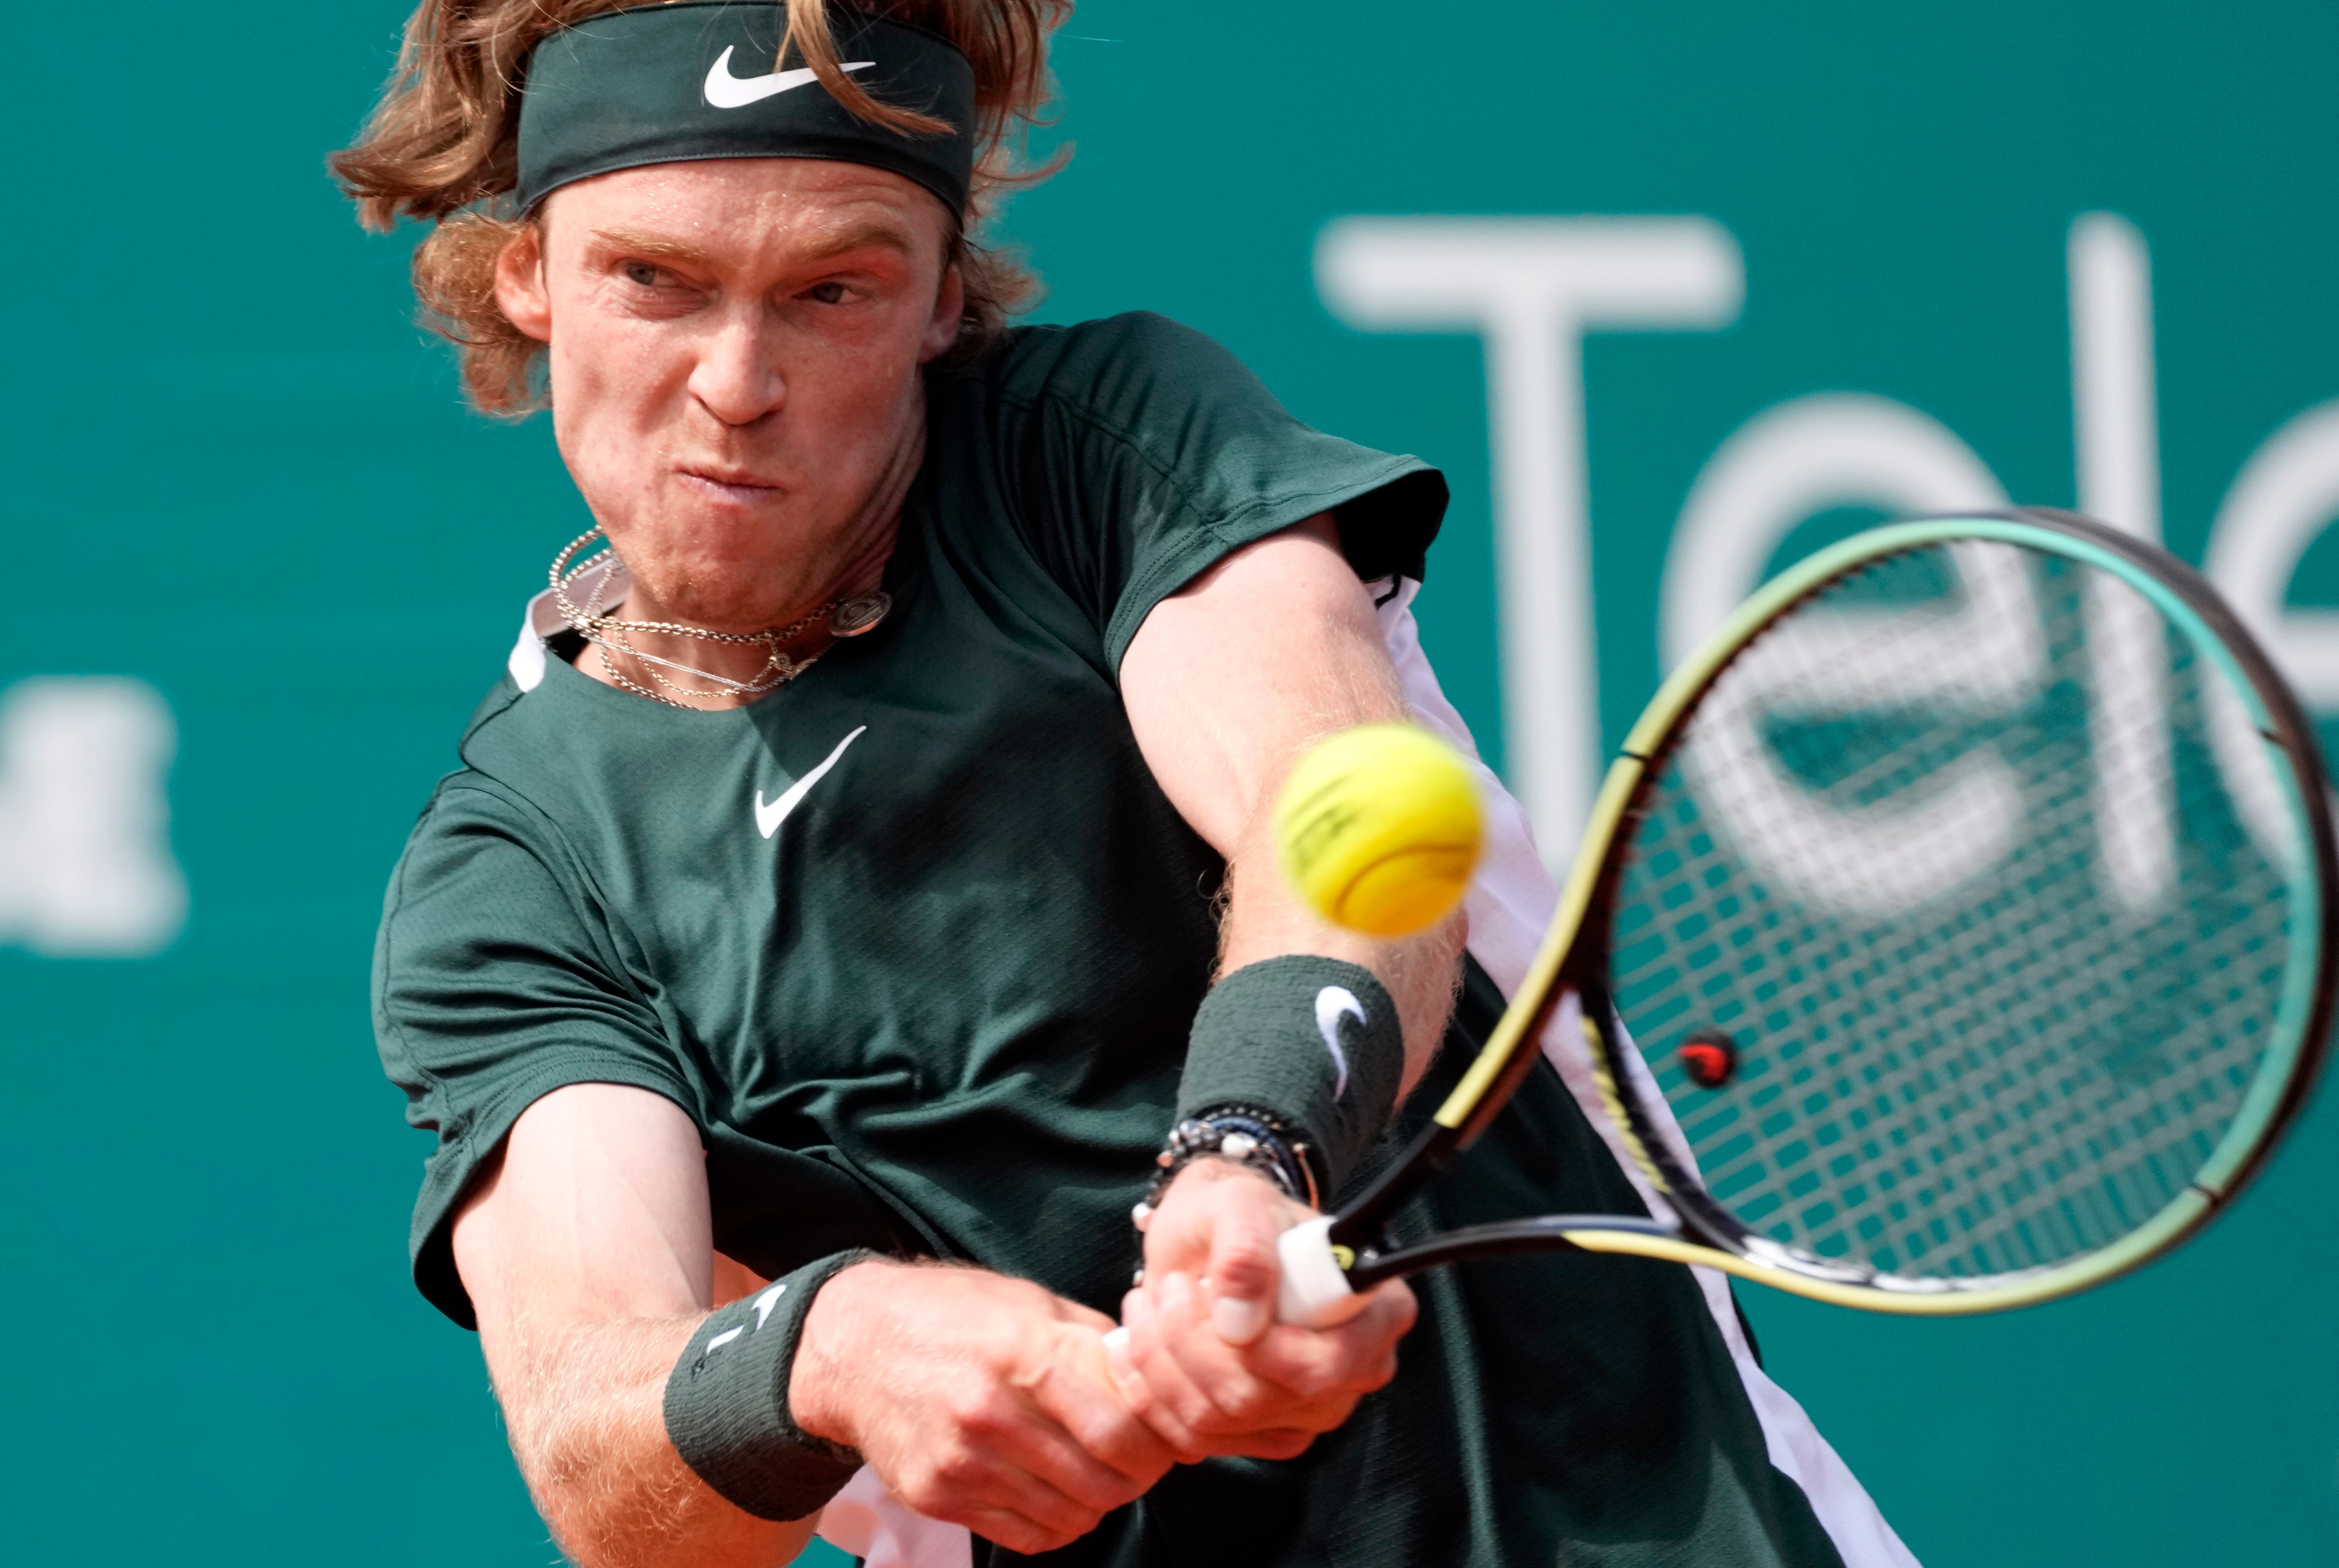 Andrey Rublev criticised the ban after his match at the Serbian Open (Darko Vojinovic/AP)